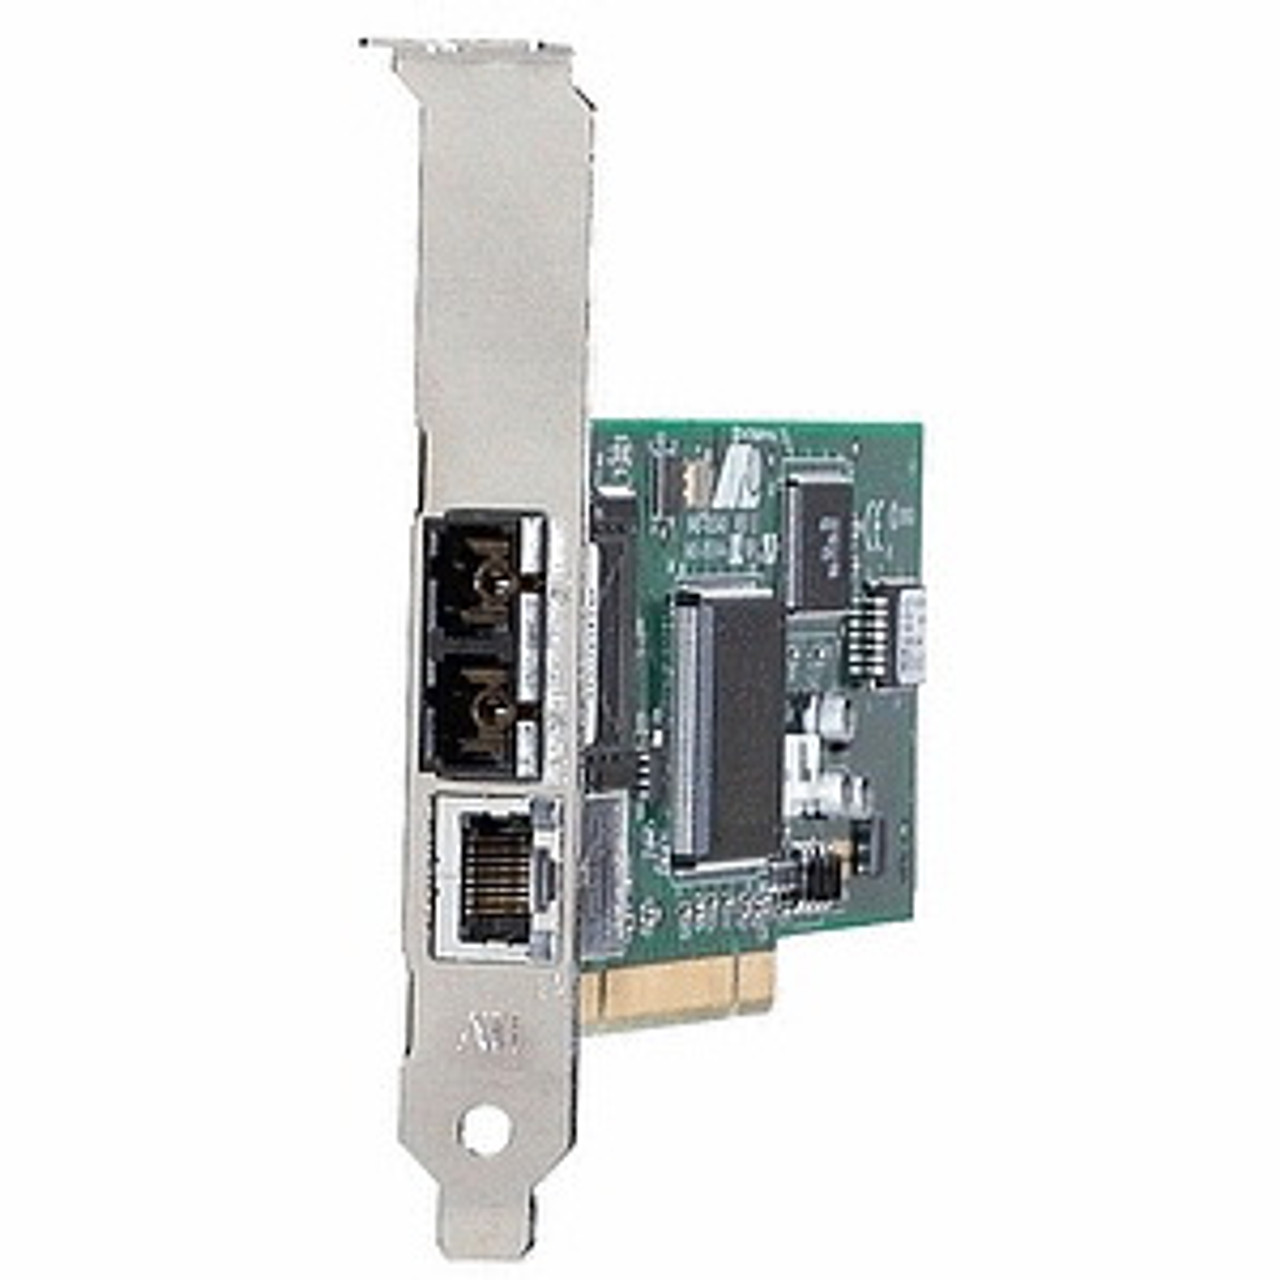 AT-2701FTX-ST Allied Telesis Dual-Ports RJ-45 100Mbps 10Base-TX/100Base-T Fast Ethernet PCI 2.2 Network Adapter for HP Compatible